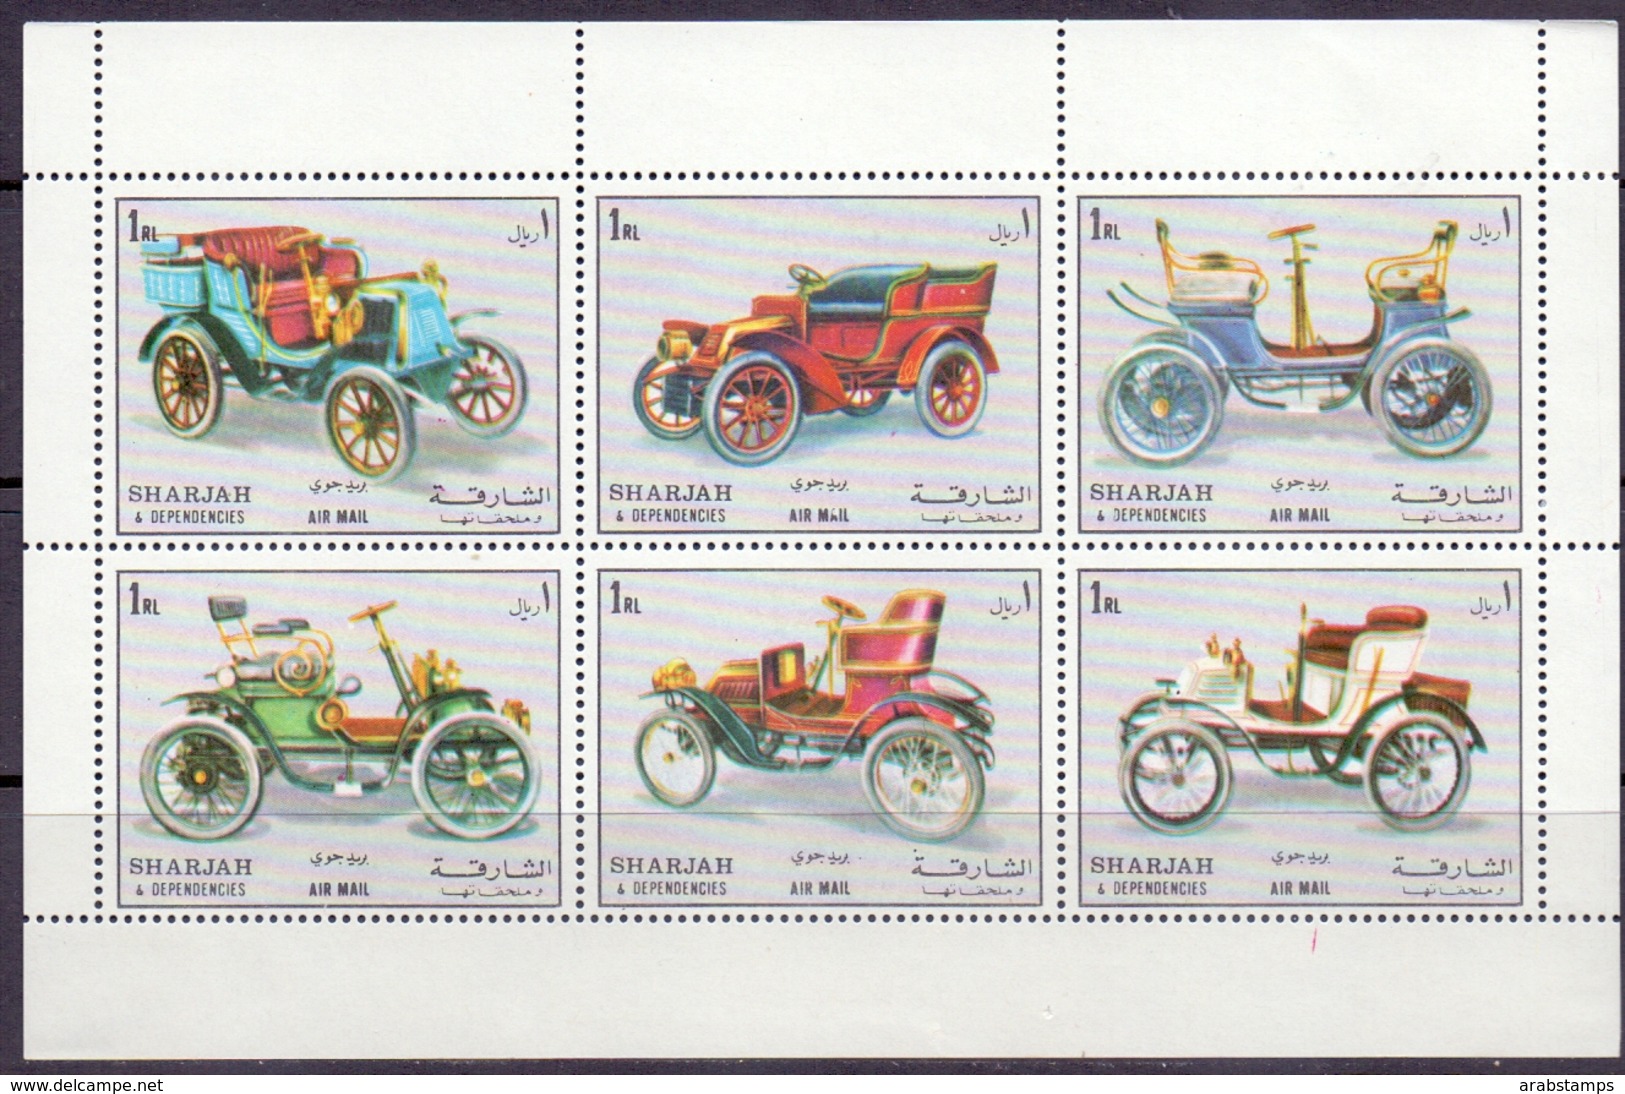 1972 SHARJAH Old Classic Cars Sheetlets Complete Set 6 Values Perforated MNH - Sharjah